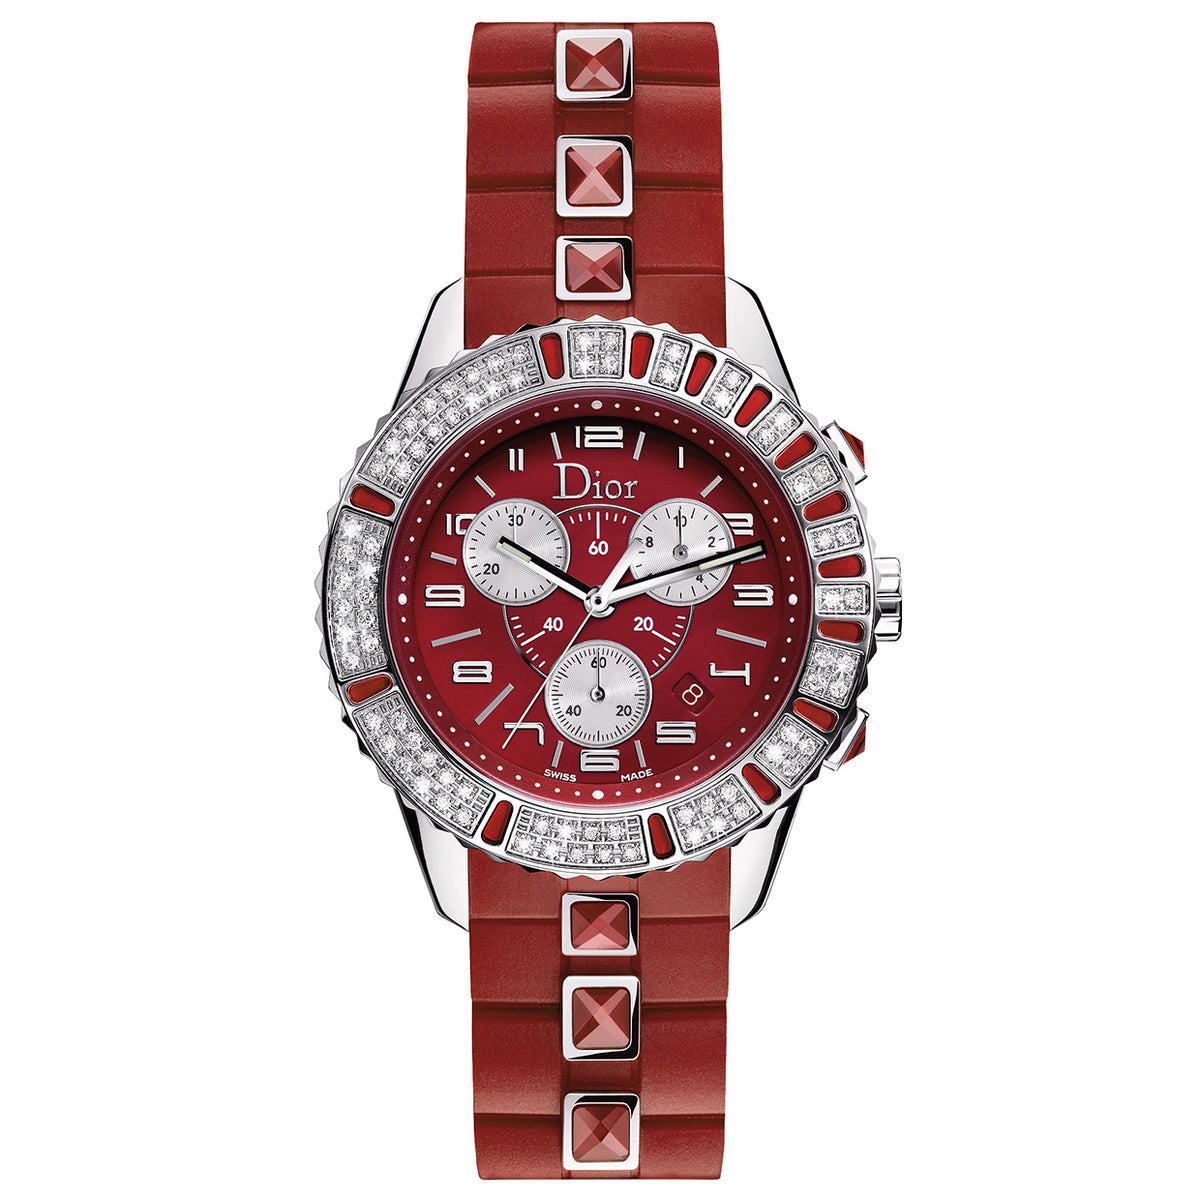 Christian Dior Christal Chronograph Red Sapphire watch 